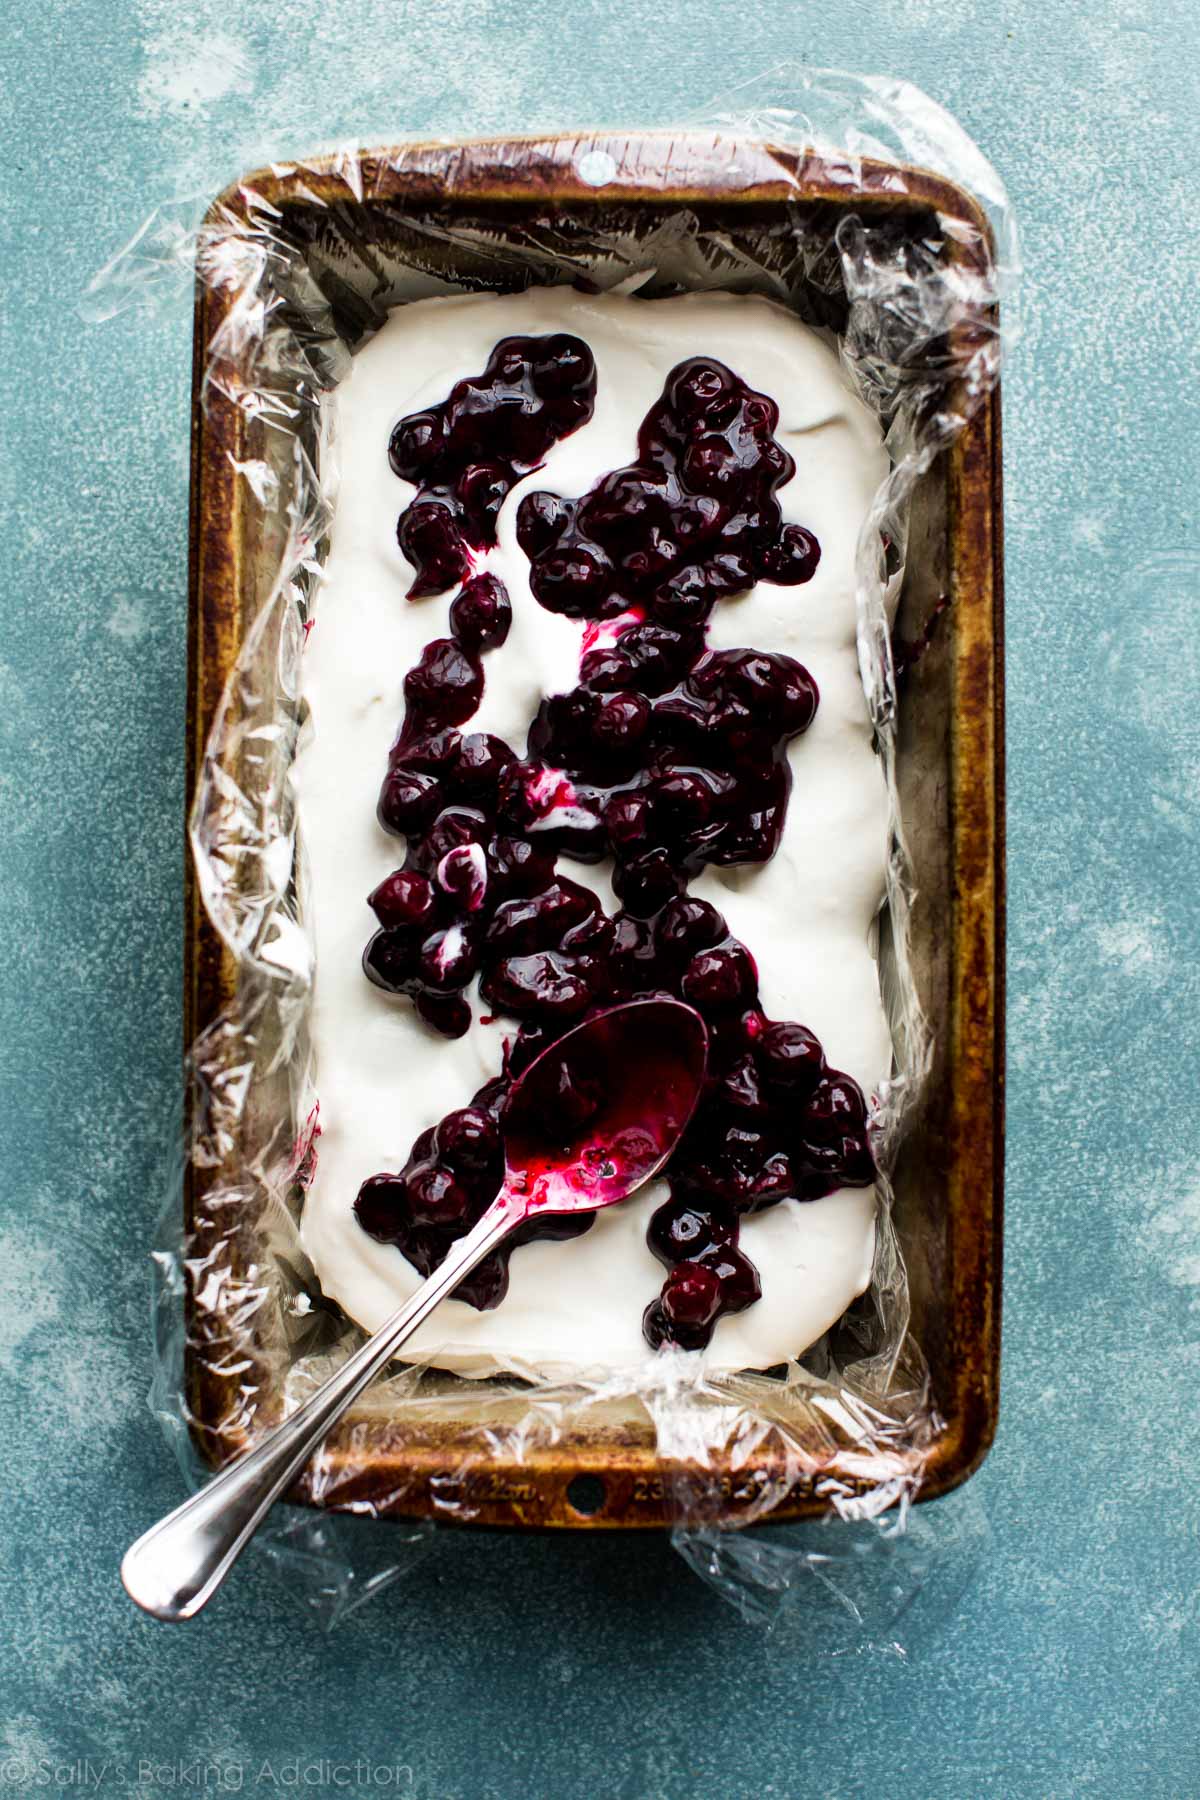 layer of blueberry sauce on top of whipped cream in a loaf pan